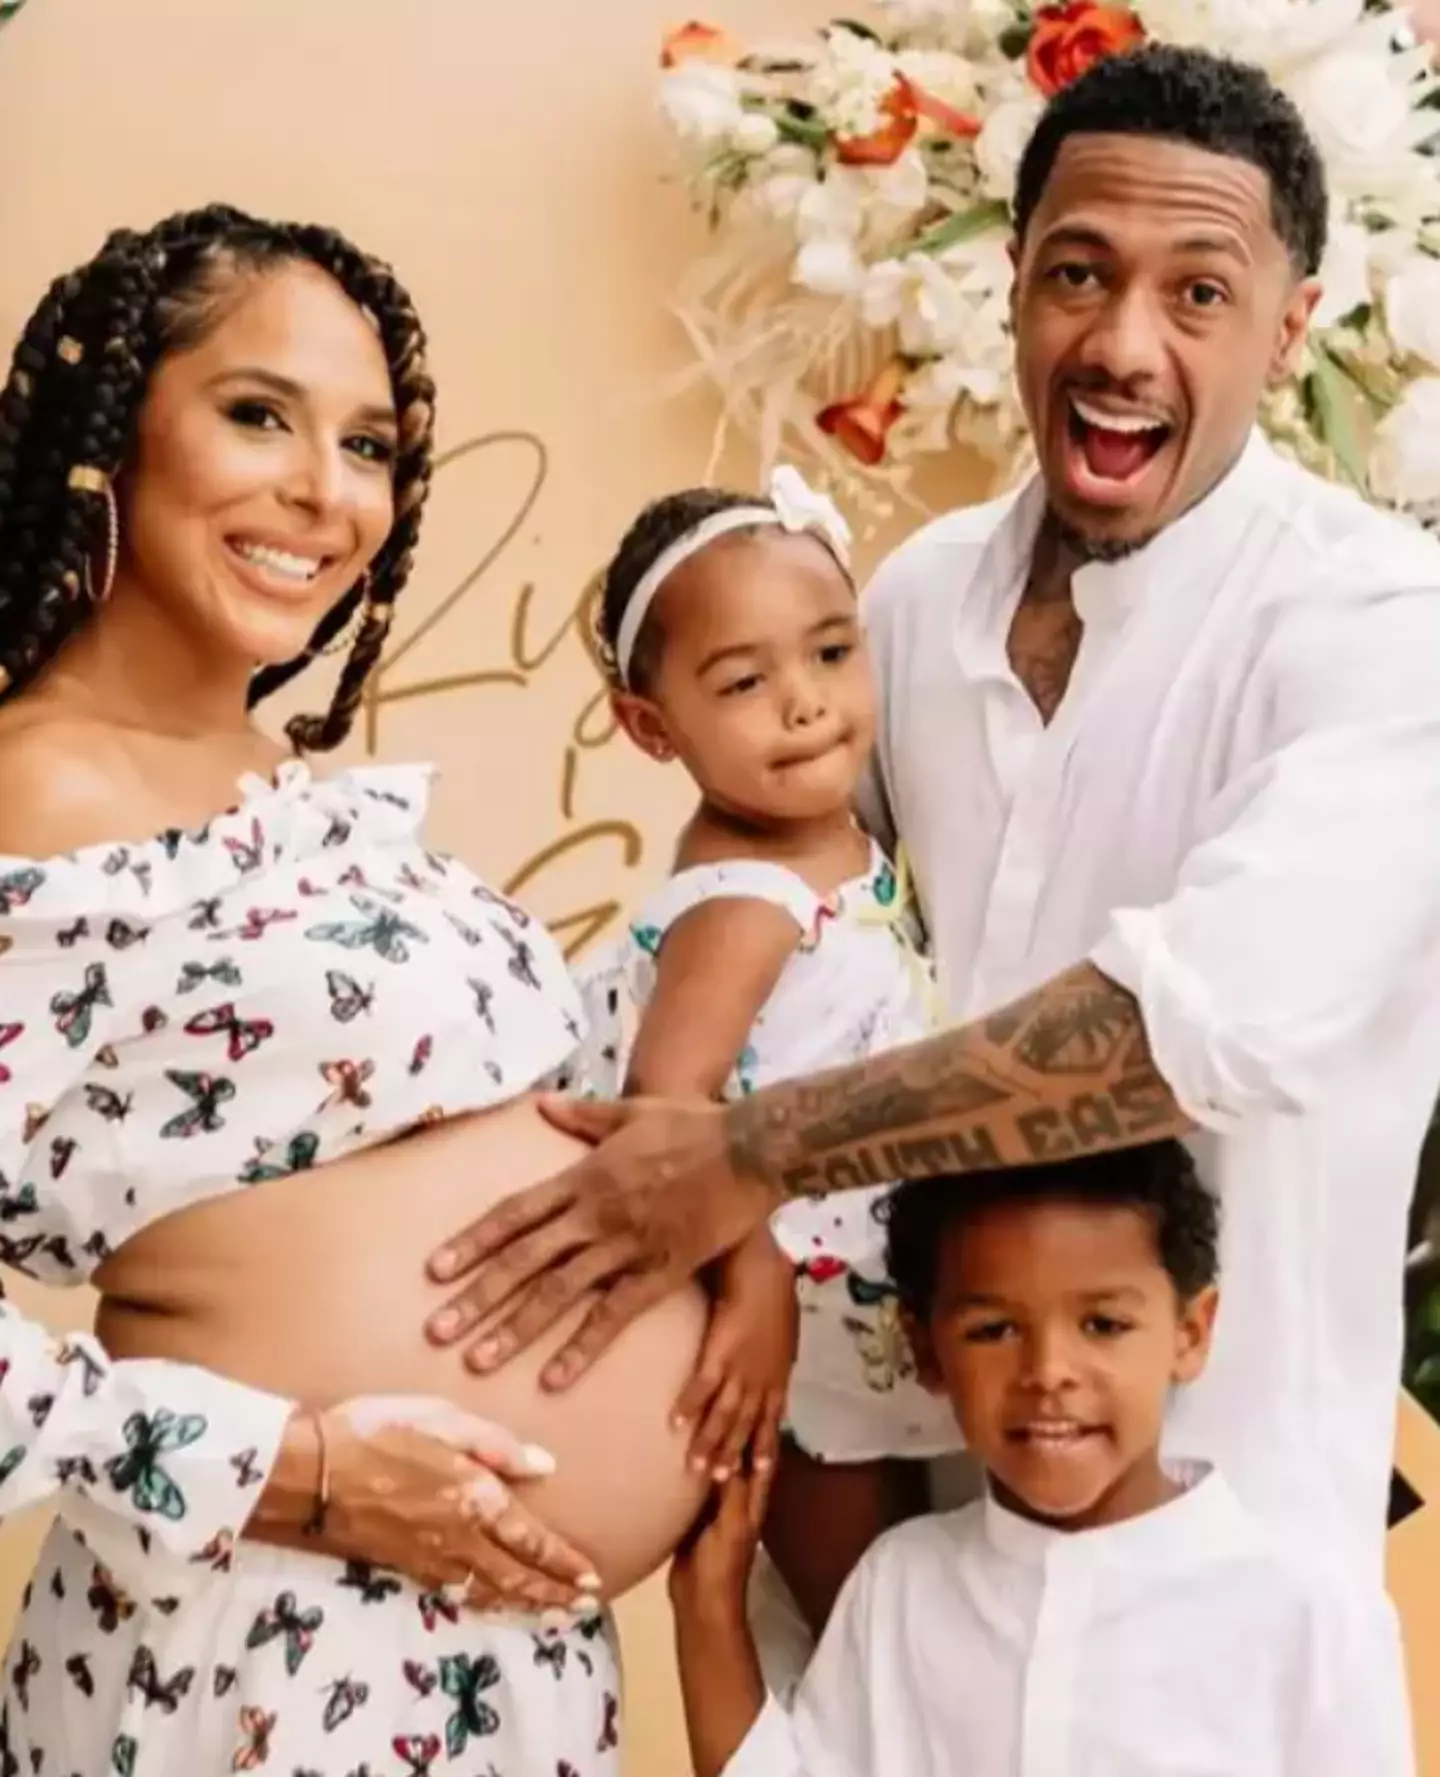 Nick Cannon with Brittany Bell. The pair share three children together.